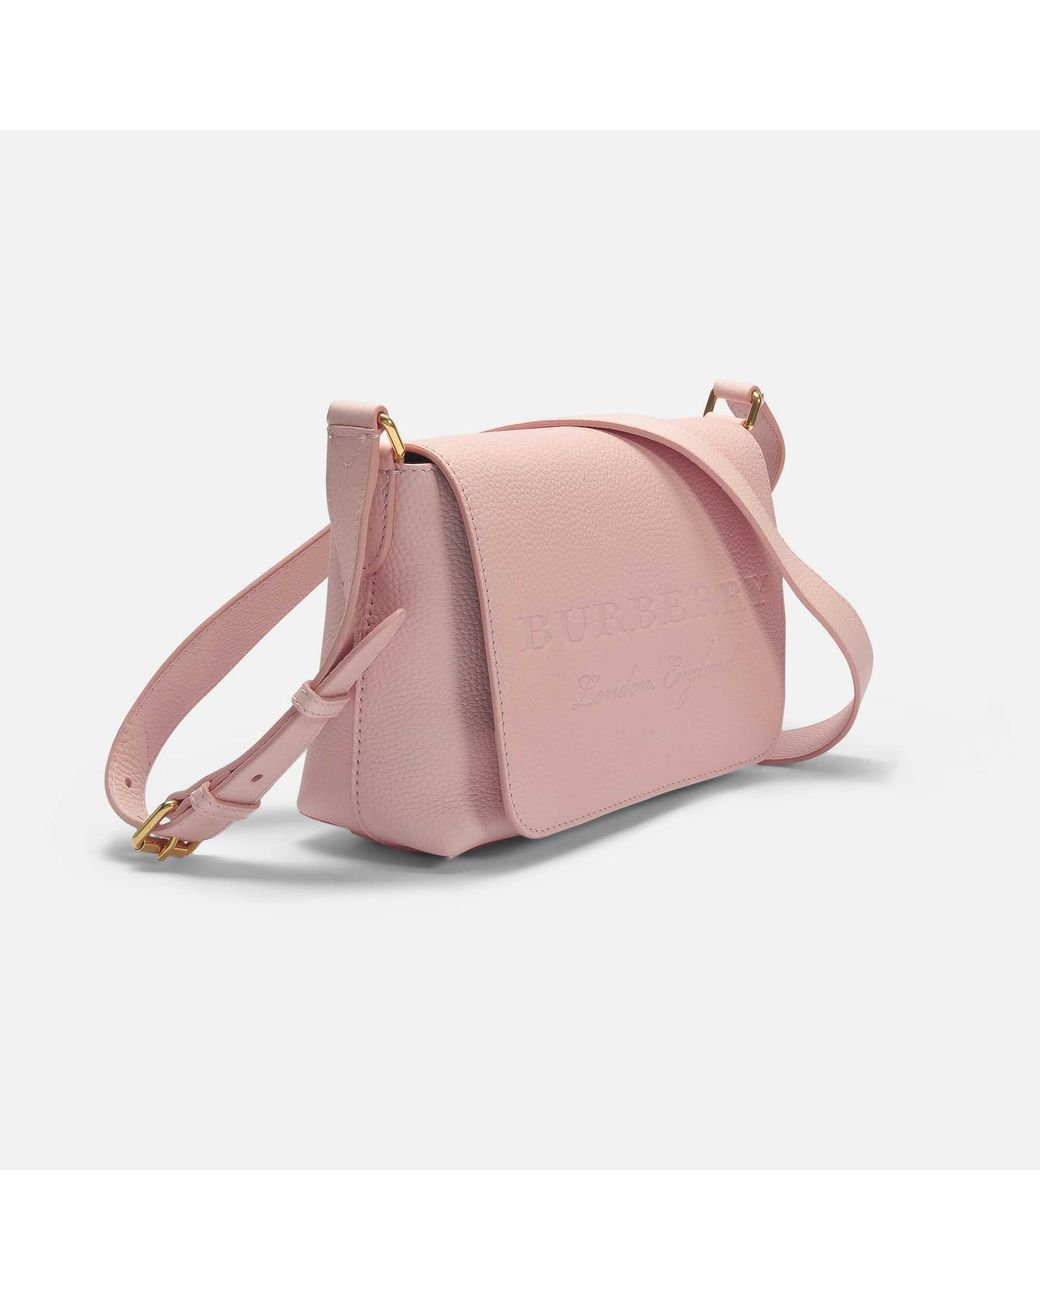 Burberry Small Burleigh Crossbody Bag In Pale Ash Rose Grained